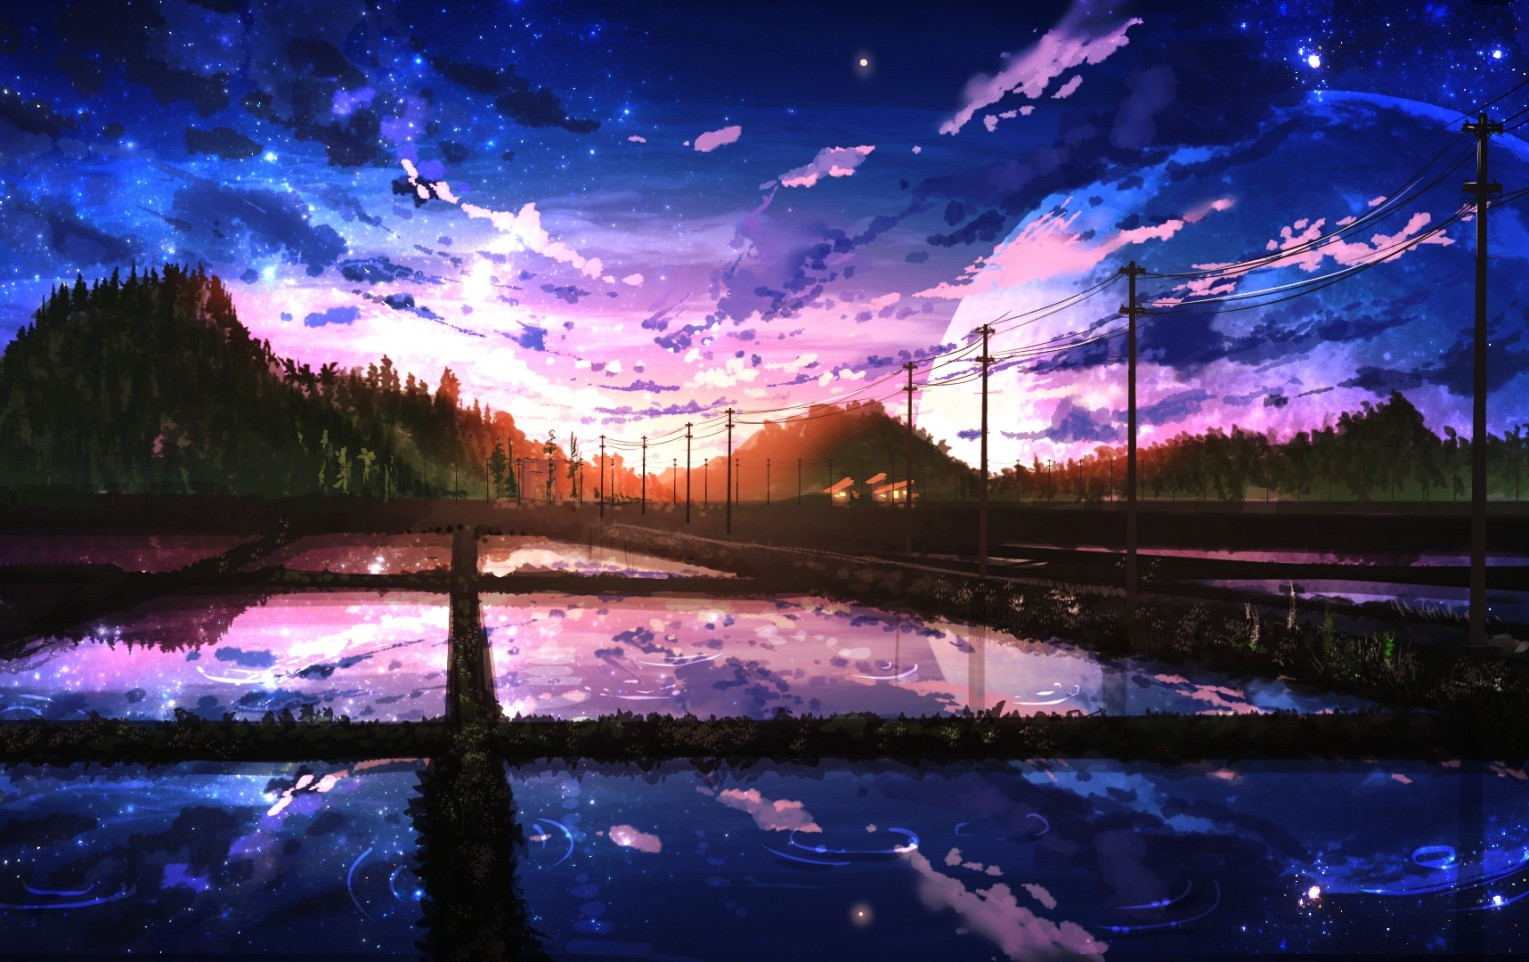 Download 1529x962 Anime Landscape, Scenic, Moon, Painting, Sky Wallpaper